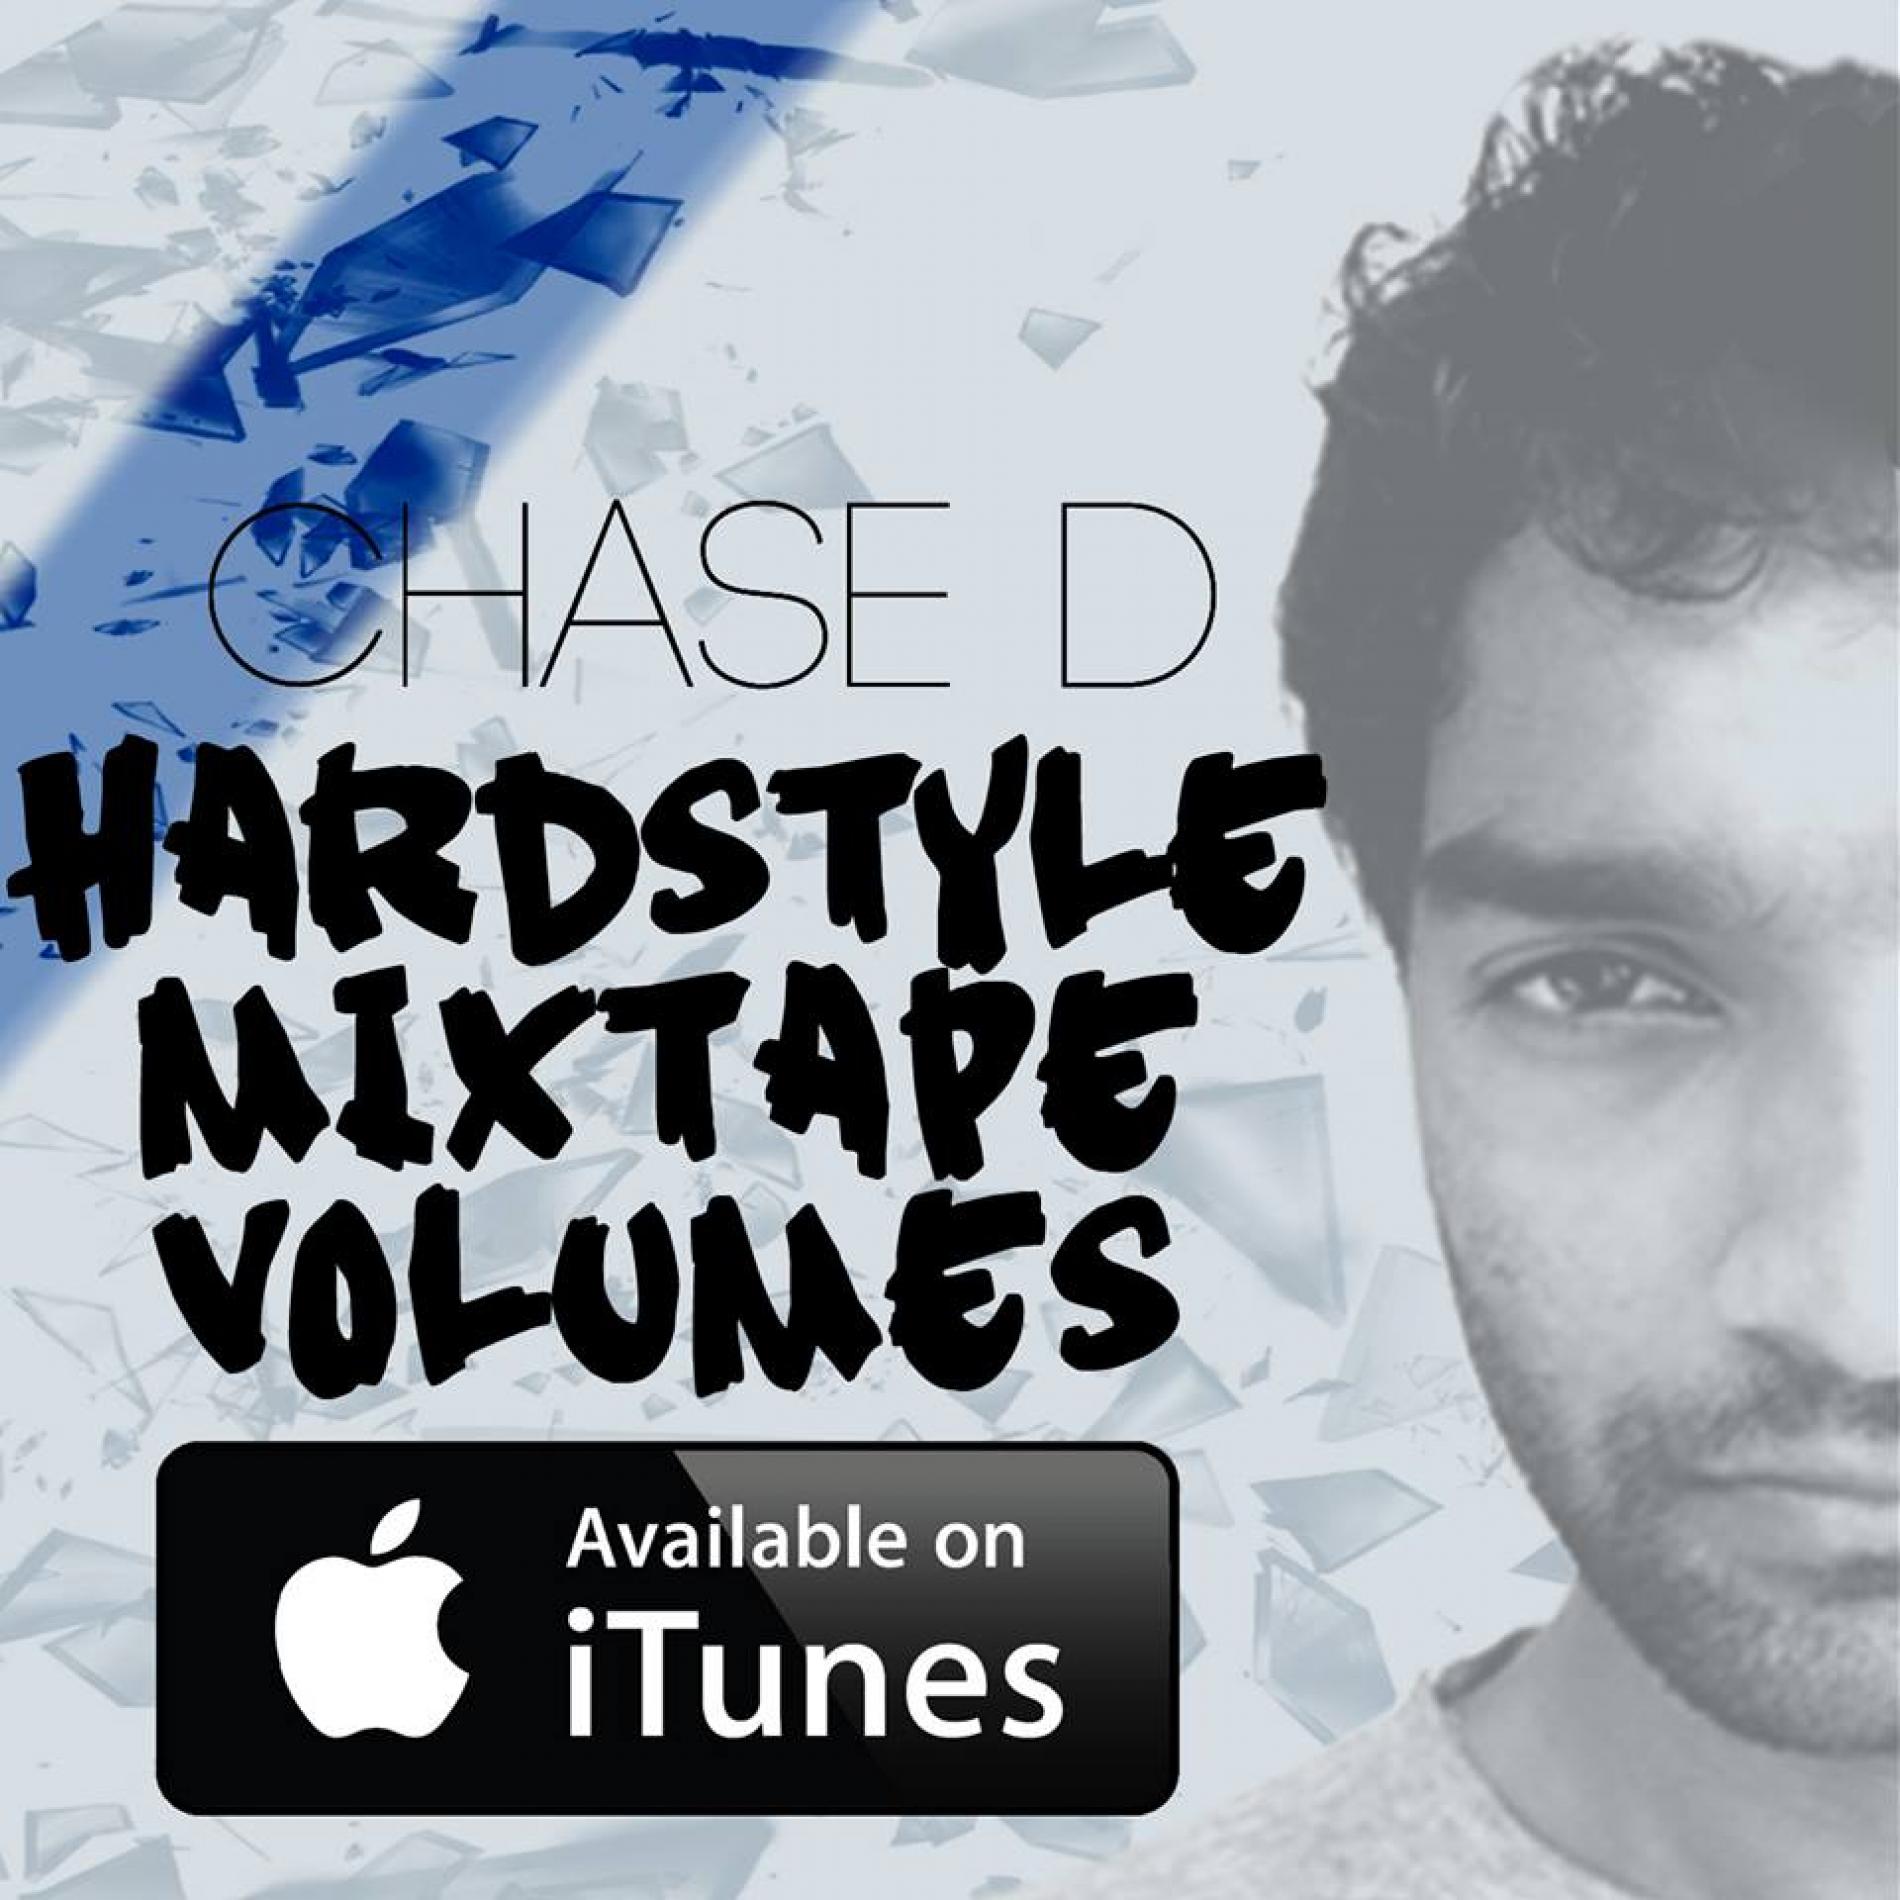 Chase D’s Hardstyle Mixtapes Now On iTunes